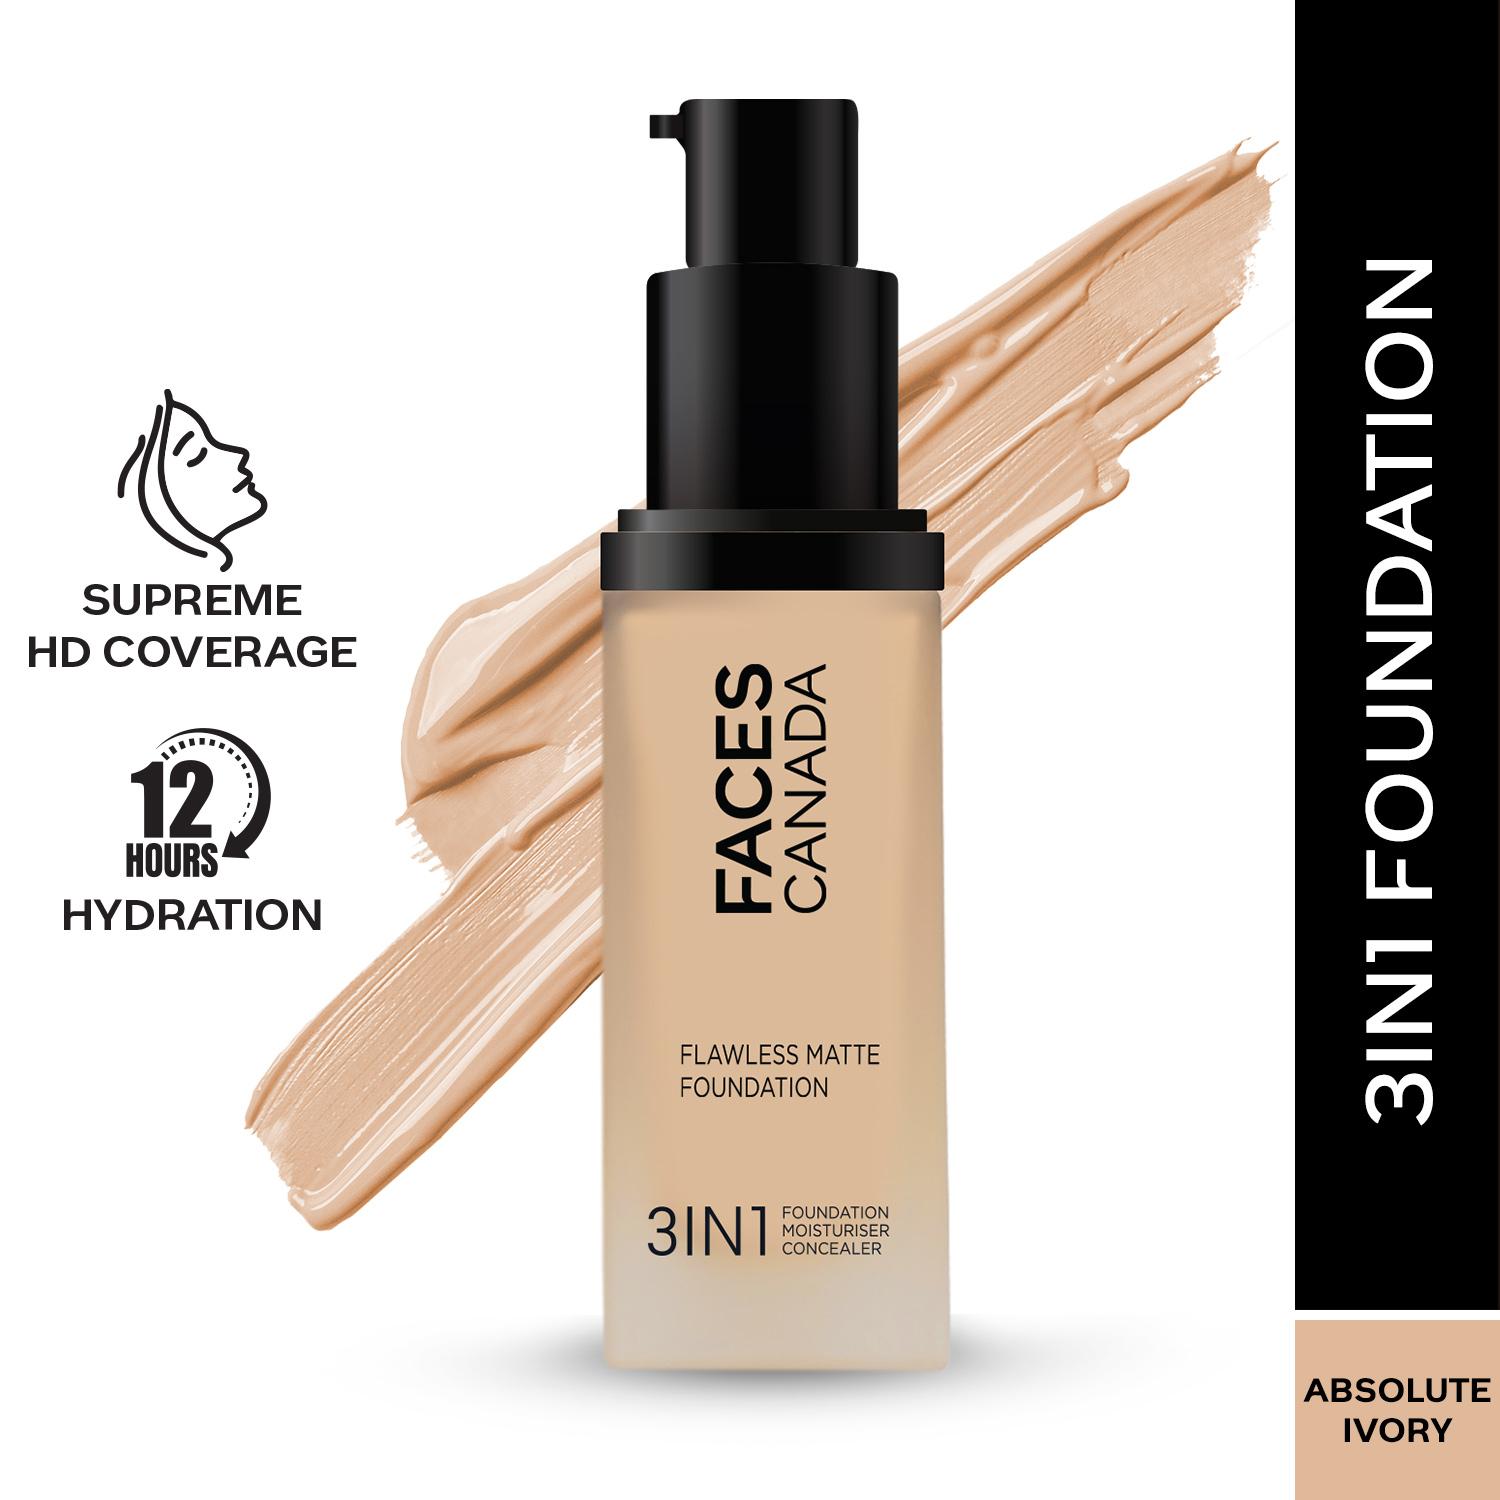 Faces Canada | Faces Canada Flawless Matte Foundation - Absolute Ivory 012, 12 HR Hydration + SPF 18 (30 ml)